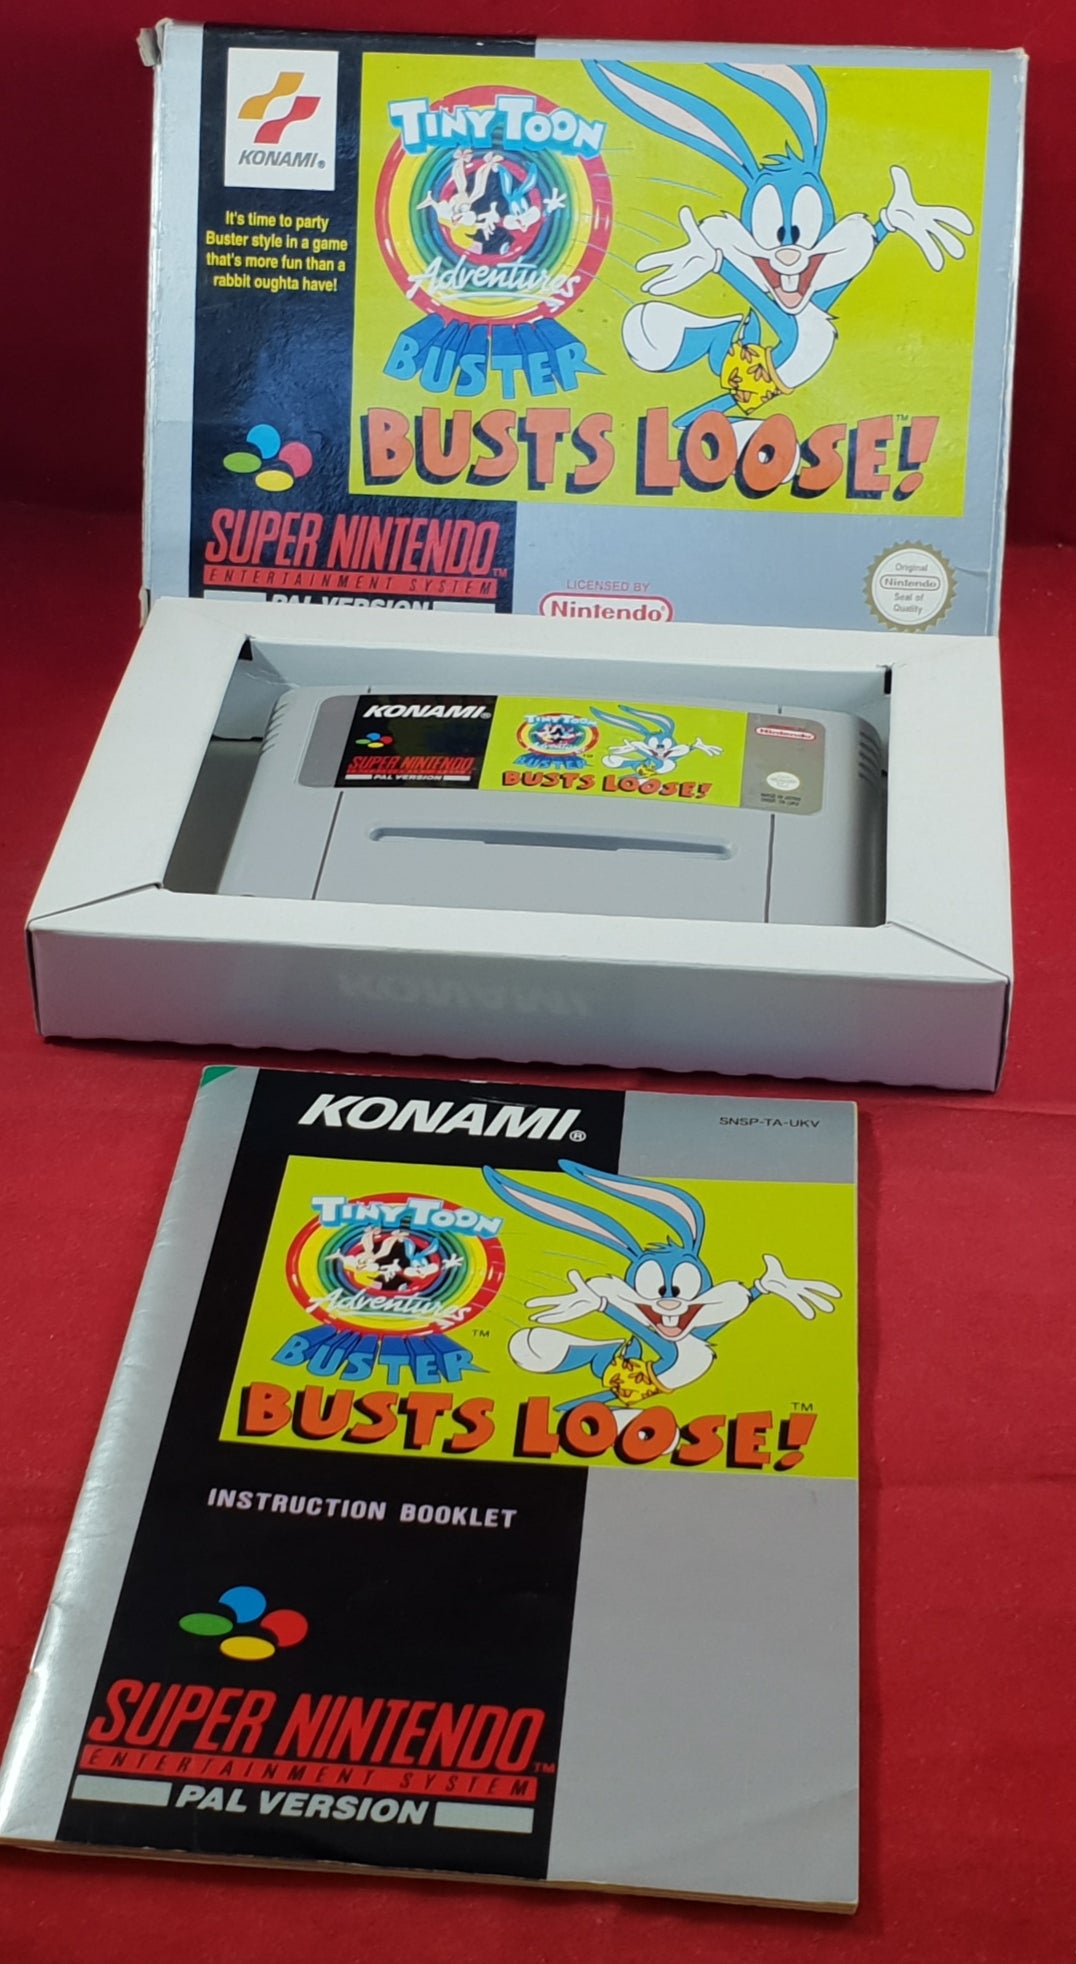 Buster Busts Loose! Super Nintendo Entertainment System (SNES) Game